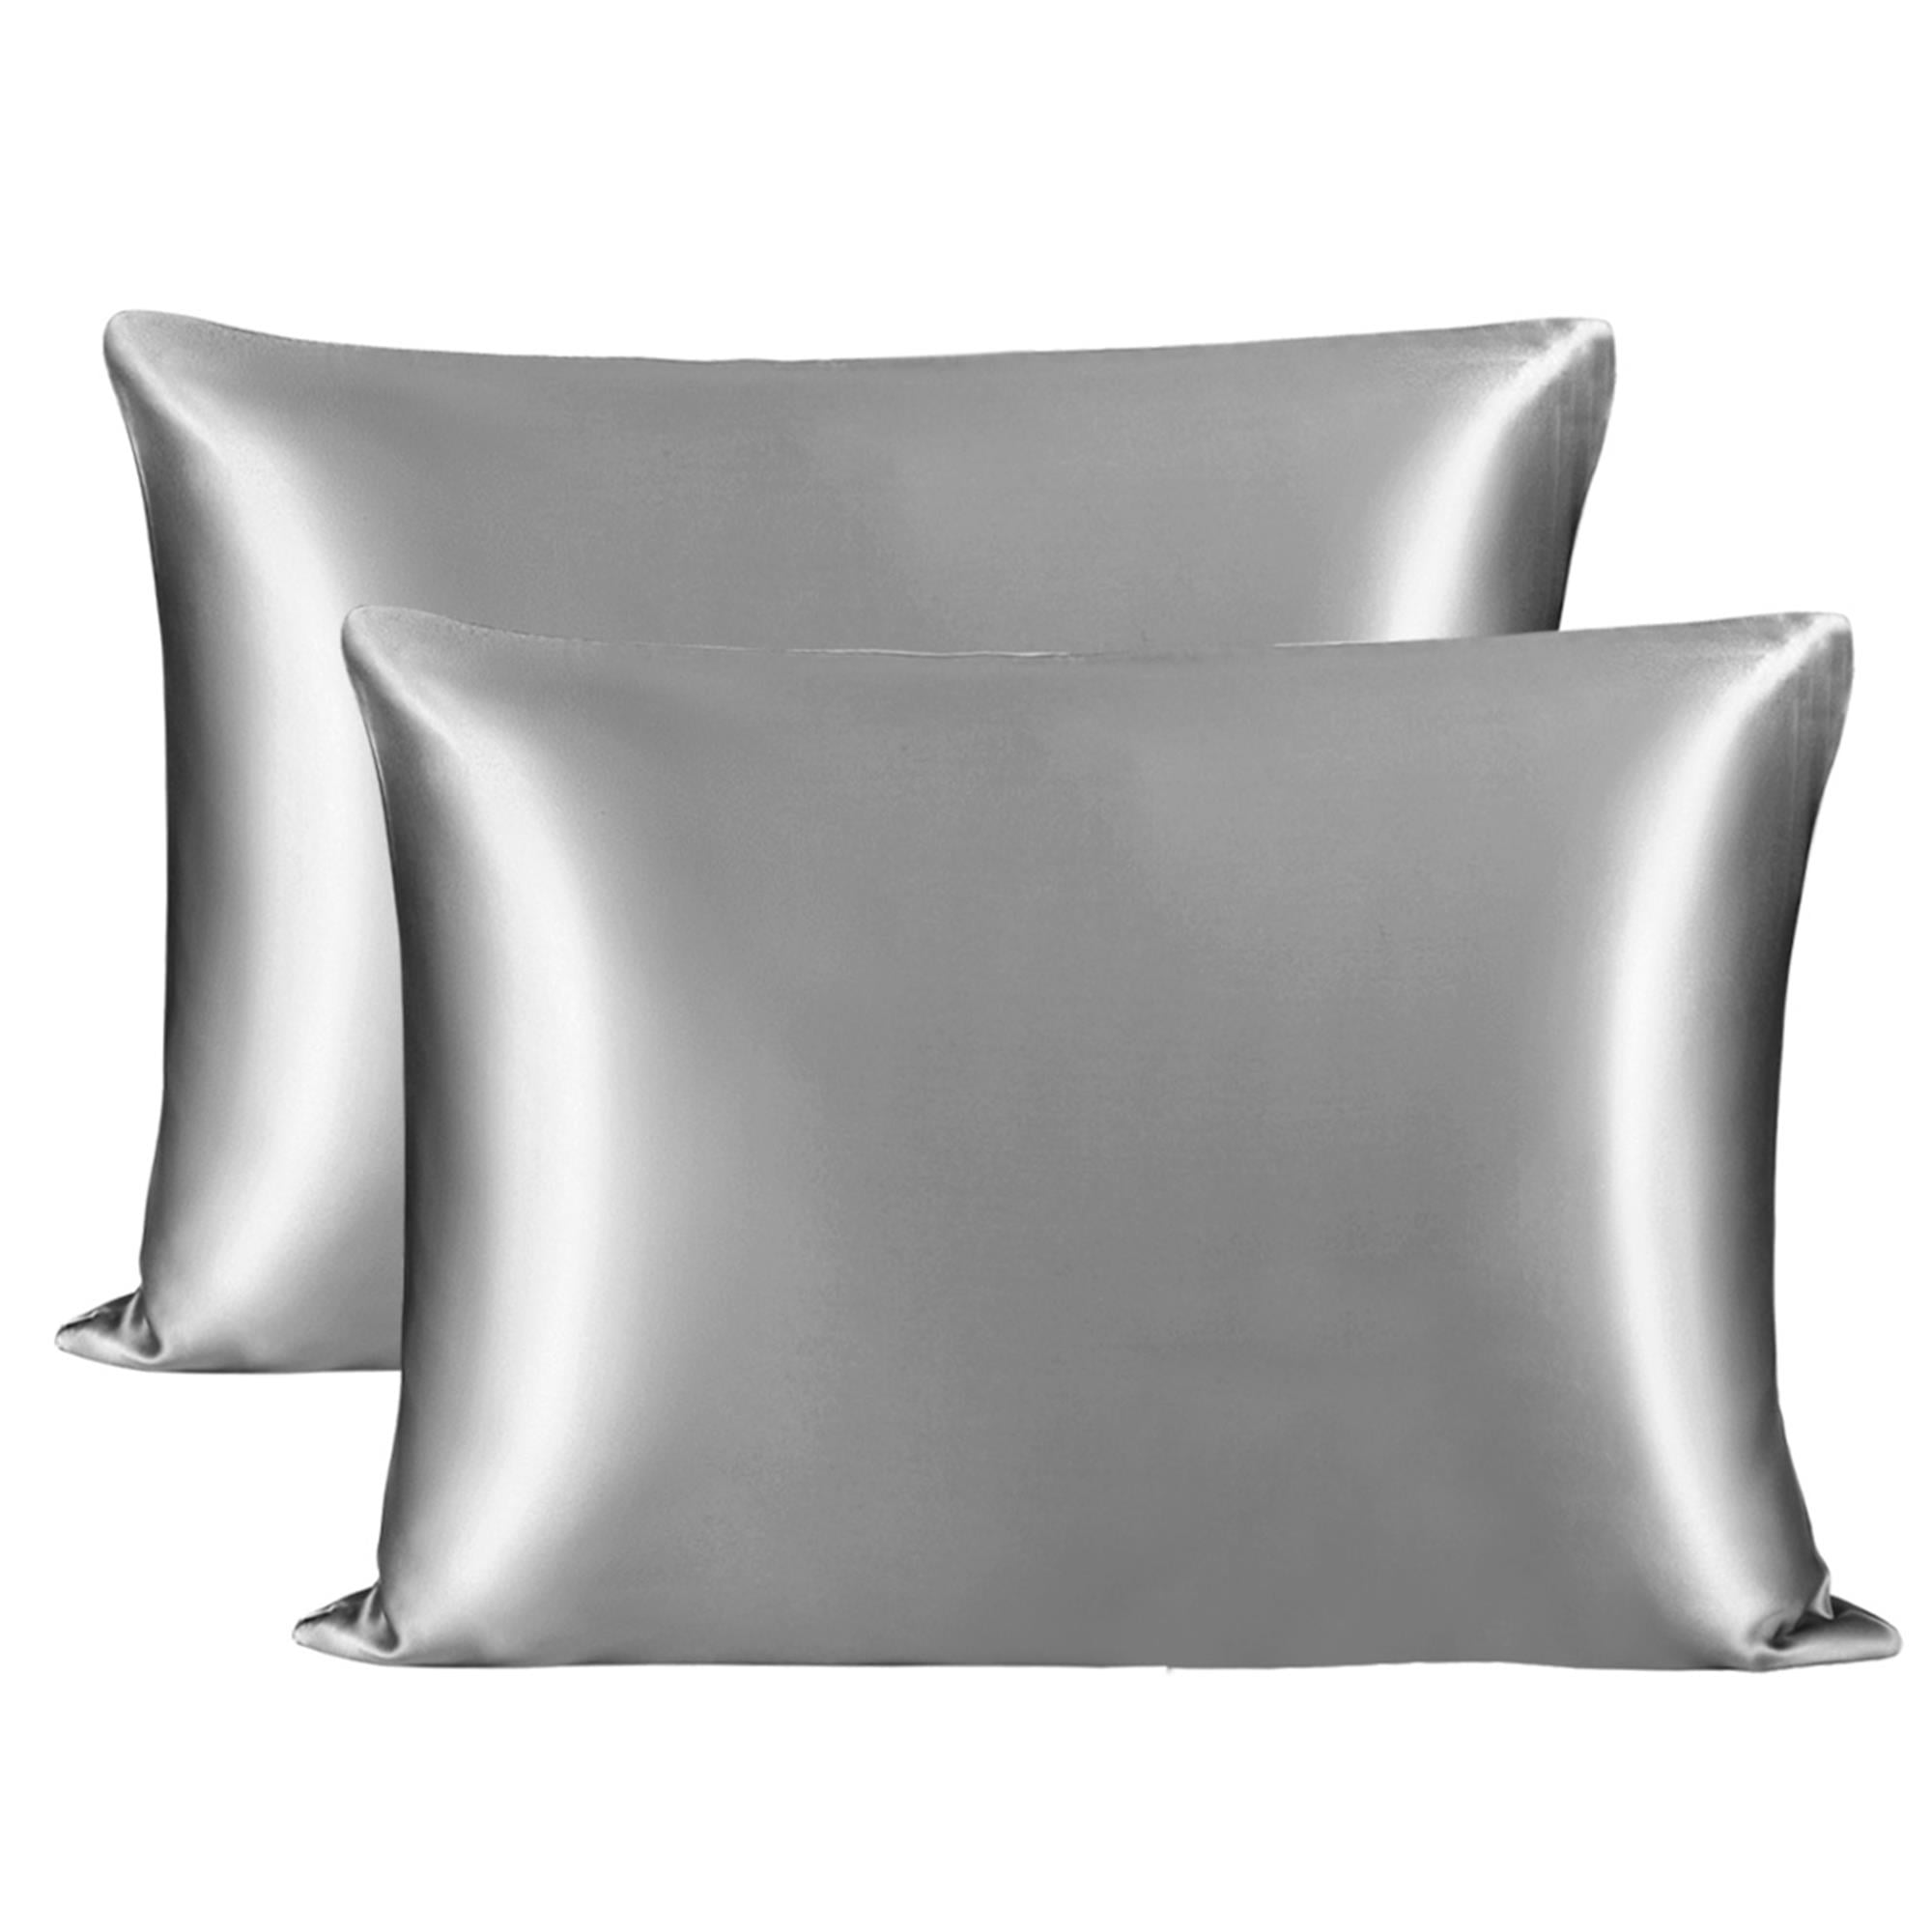 Aremetop Pack of 4 Mothers Day Pillow Covers Grey Style Mommy